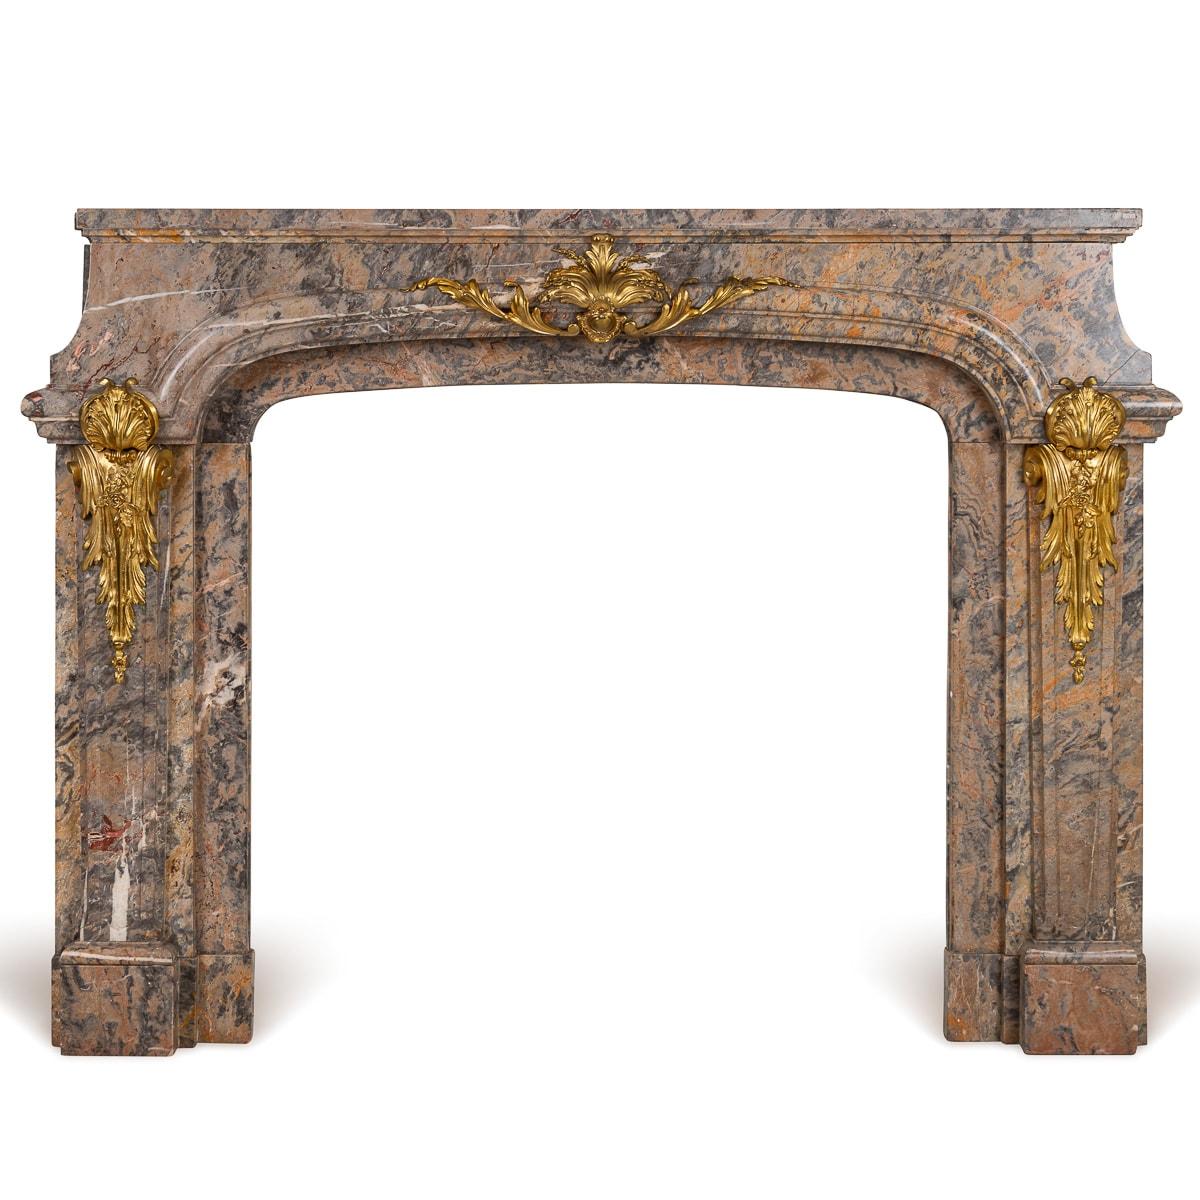 Antique 19th Century Louis XV Rococo style fireplace in Caravaggio marble, mounted with ormolu floral spay mounts. This superb fireplace adds elegance and sophistication to any interior, working well in a traditional, mid-century or even modern